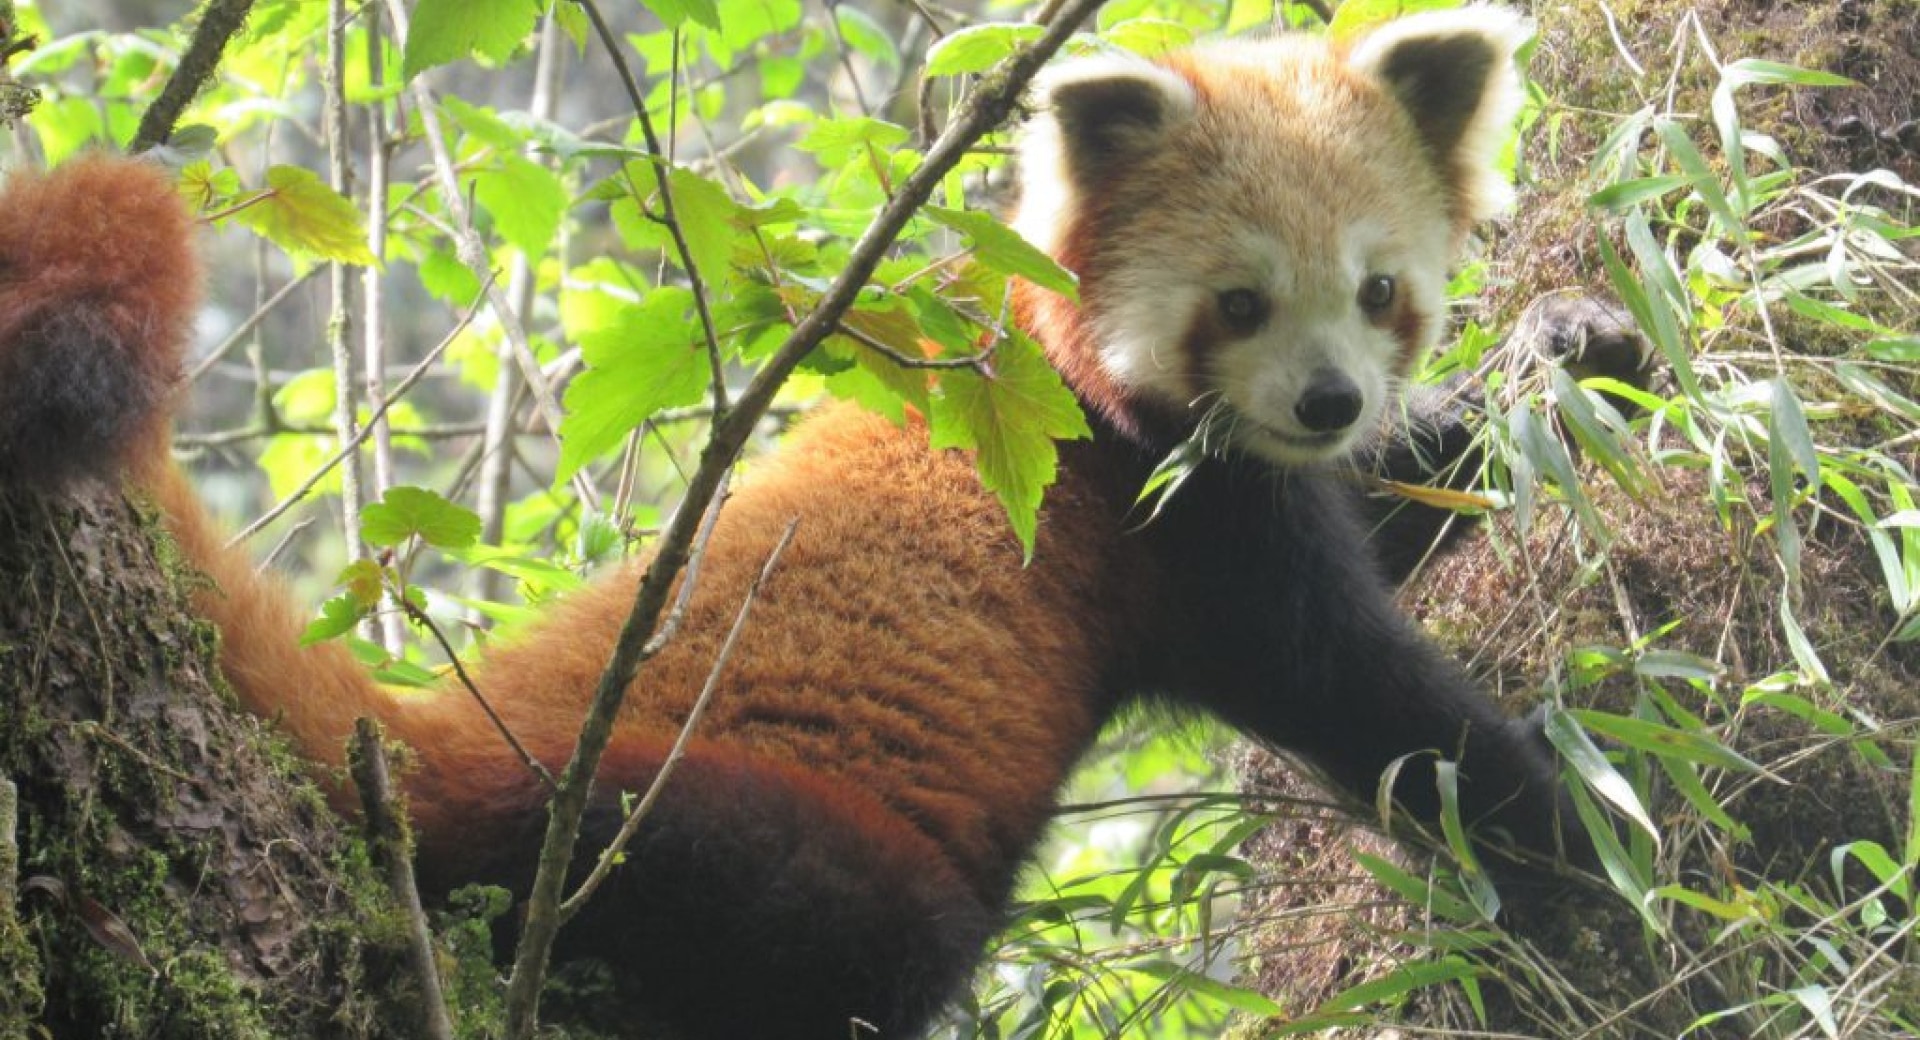 Shelter from the Storm: How Red Panda Protection Can Help Other Species in Decline